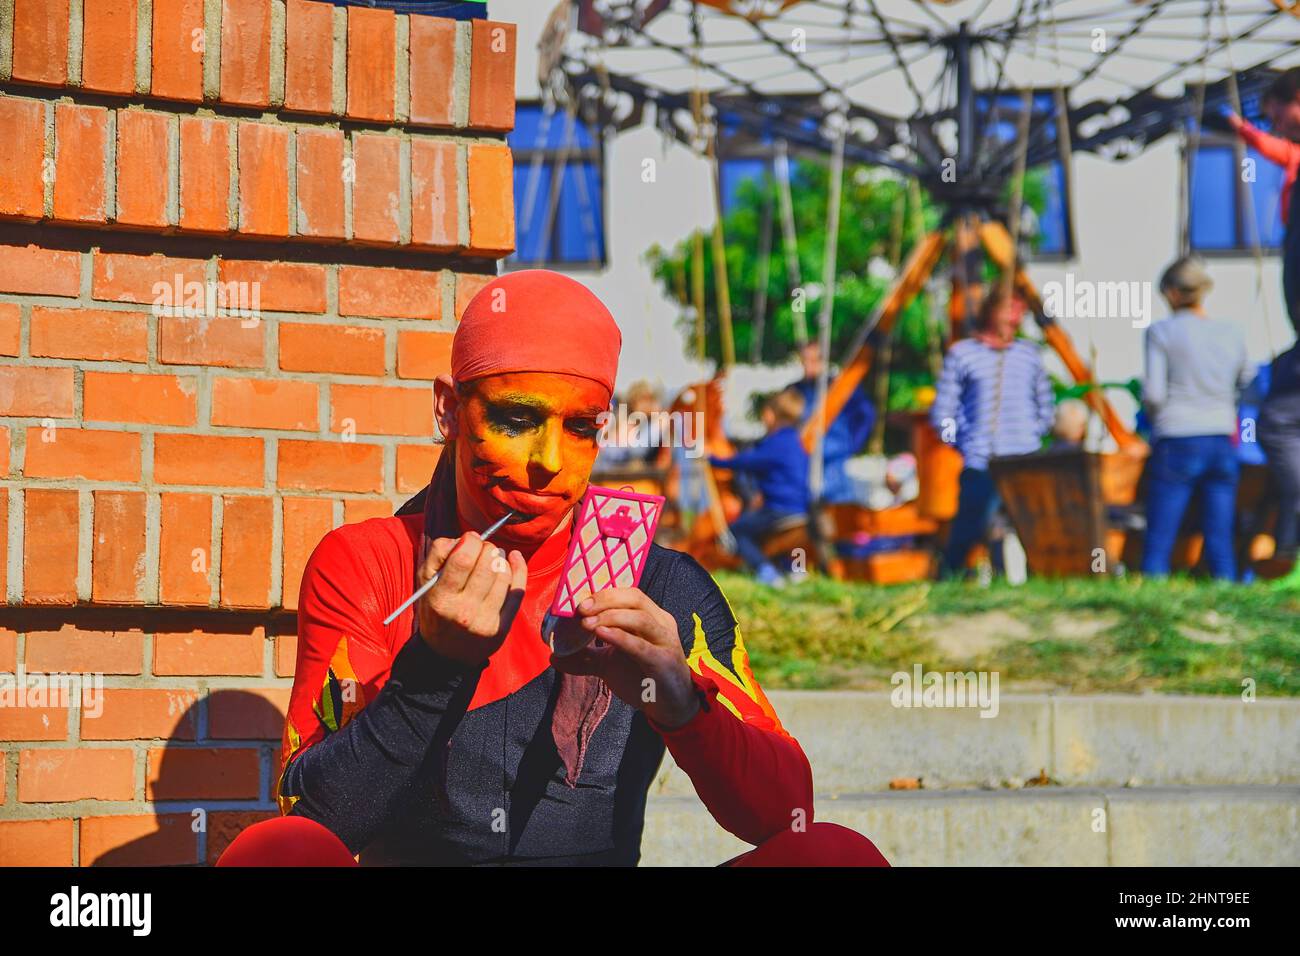 Street performer putting on his face make-up. Street performers can fool passersby and entertain tourists. Stock Photo